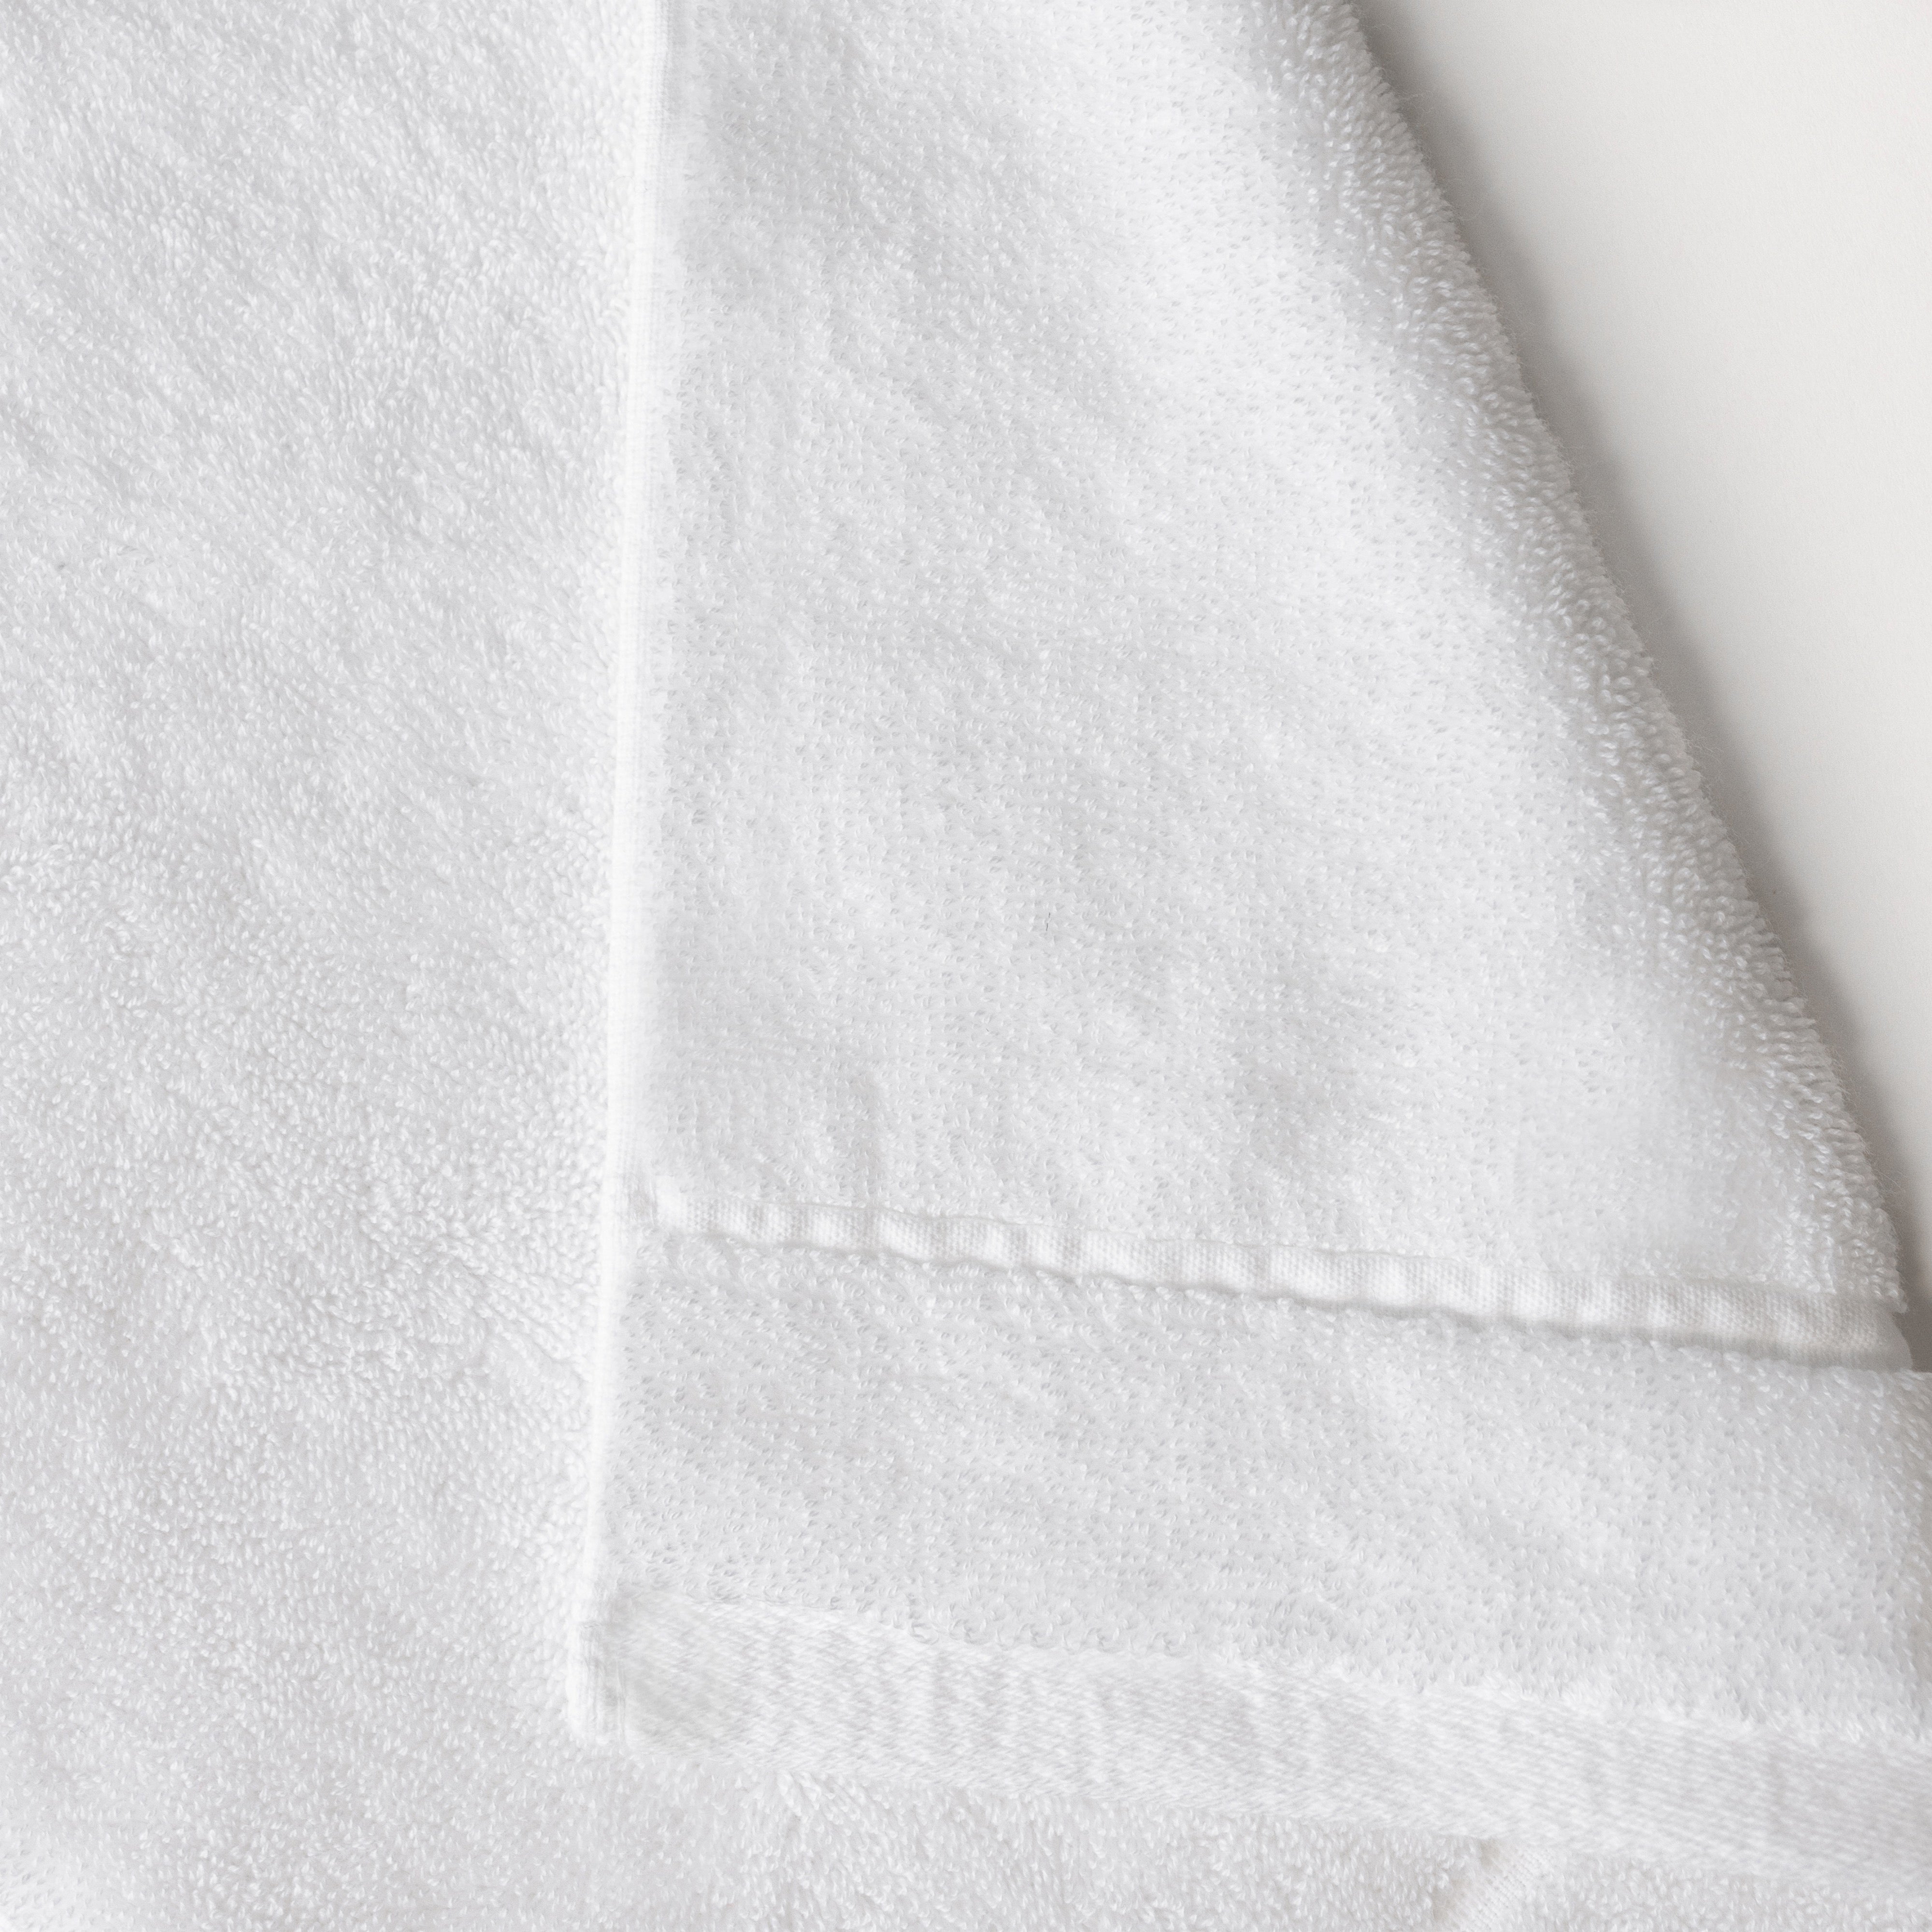 White Premium Plush Bath Towel. Photo of Premium Plush Bath Towels taken on a white background showing only the corner of the towel. |Color: White